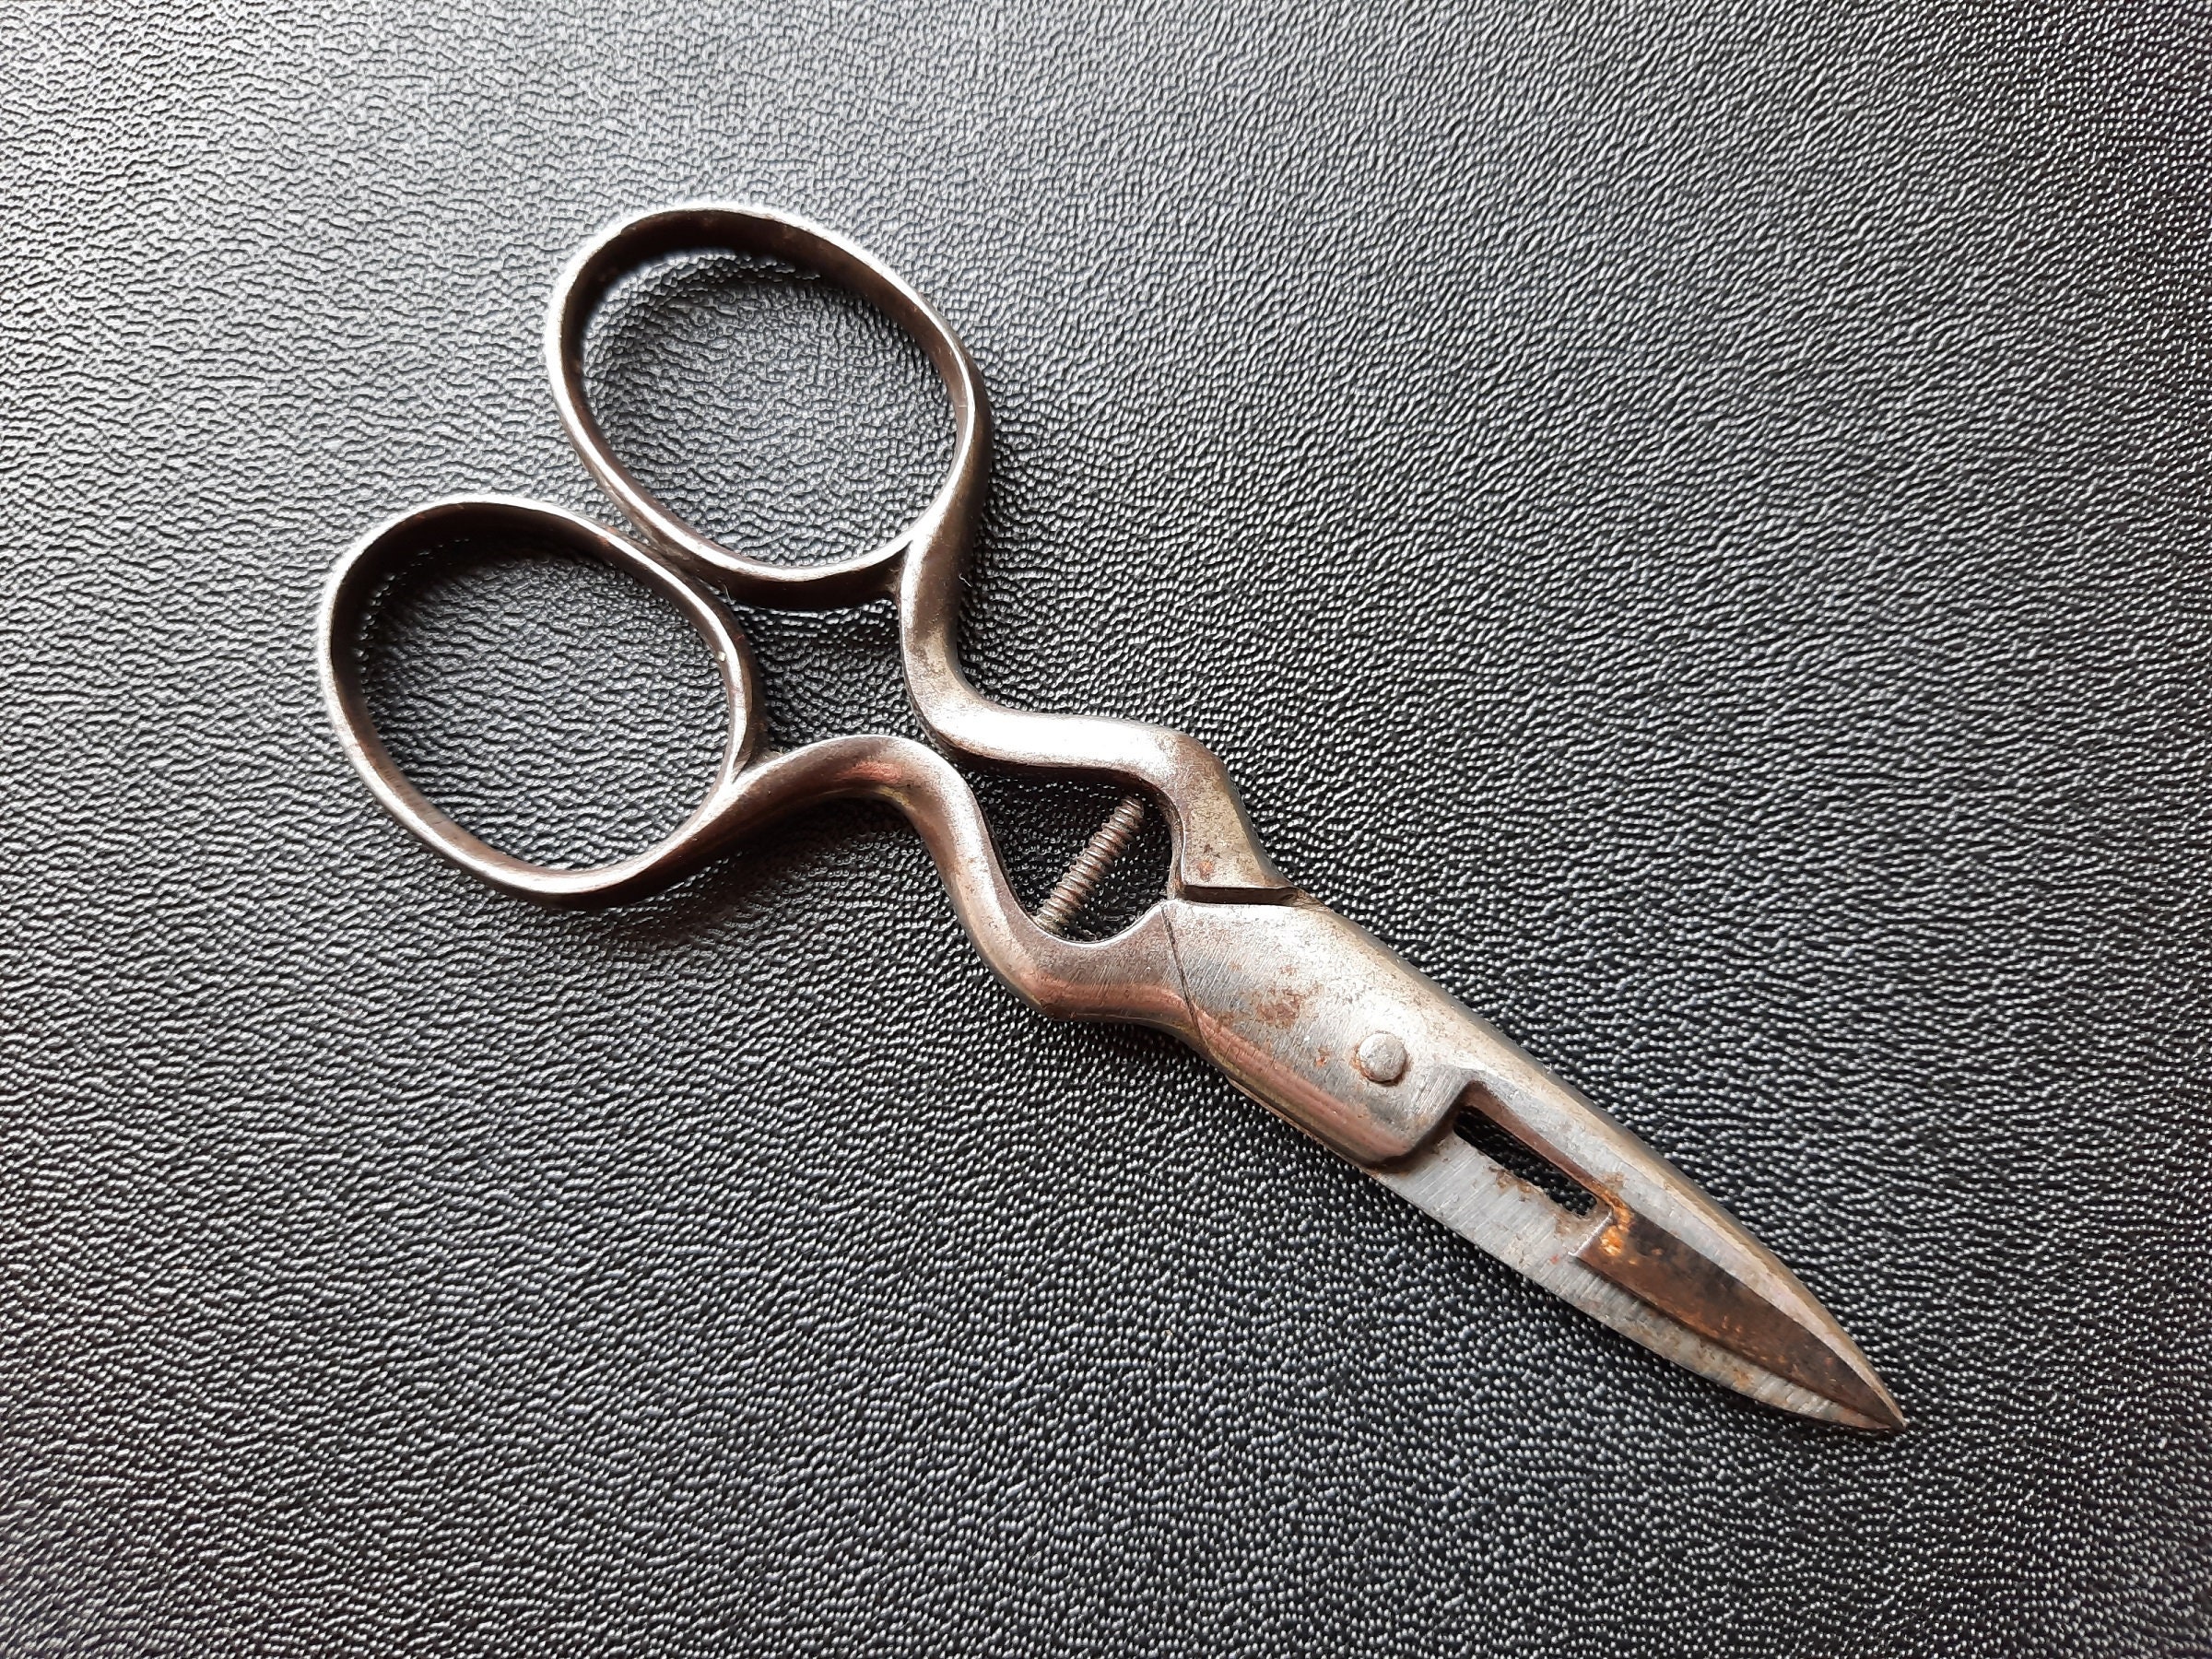 Antique Ornate Steel Small Sewing Scissors 